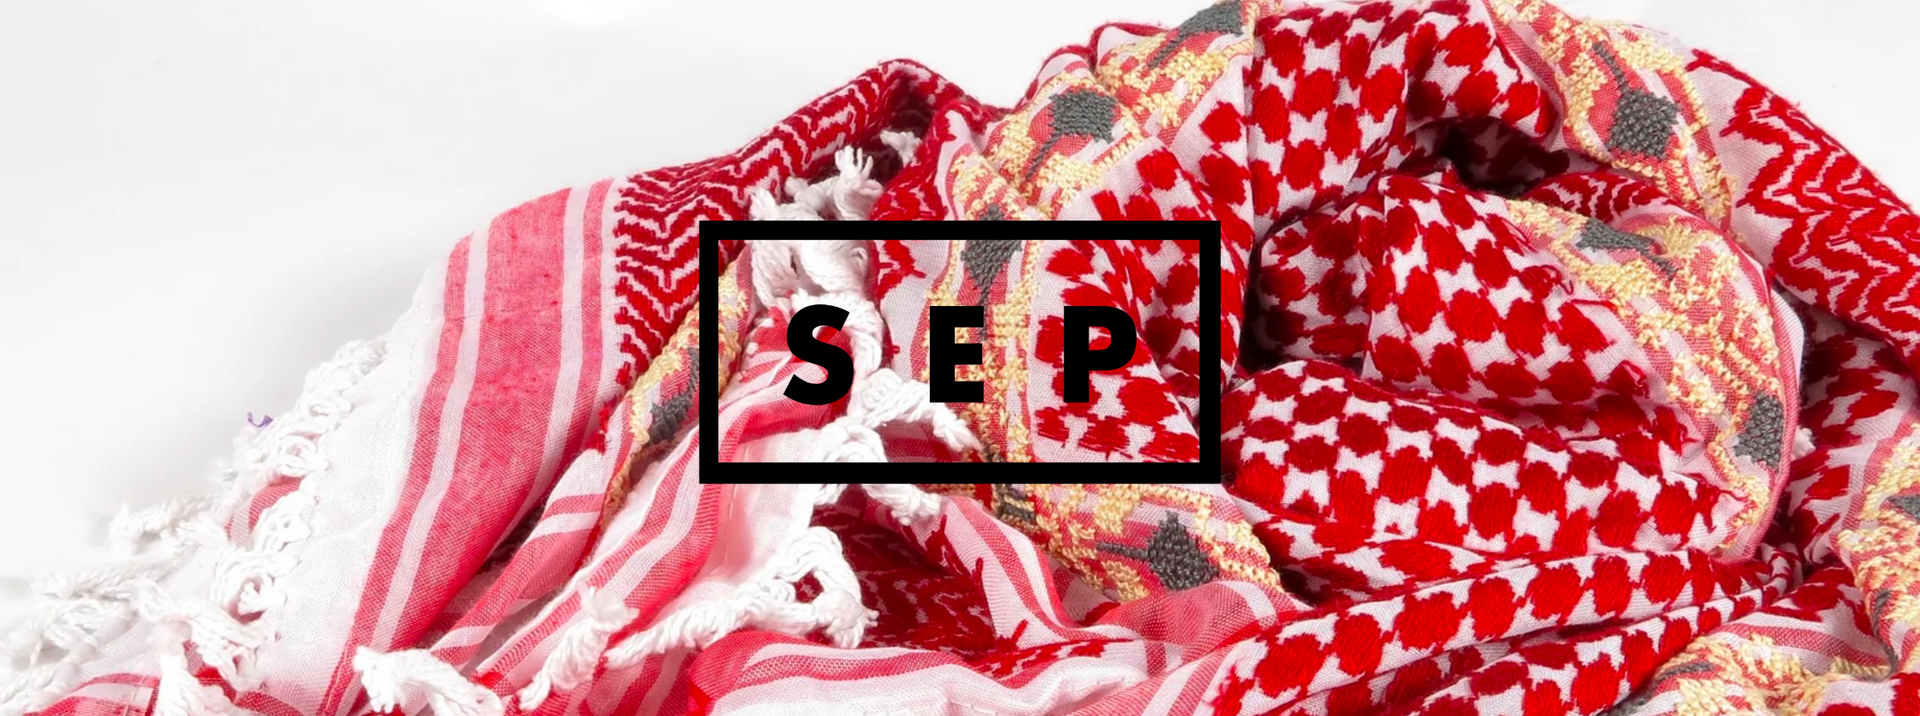 How to care for the amazing SEP piece you have been gifted or you treated yourself to?